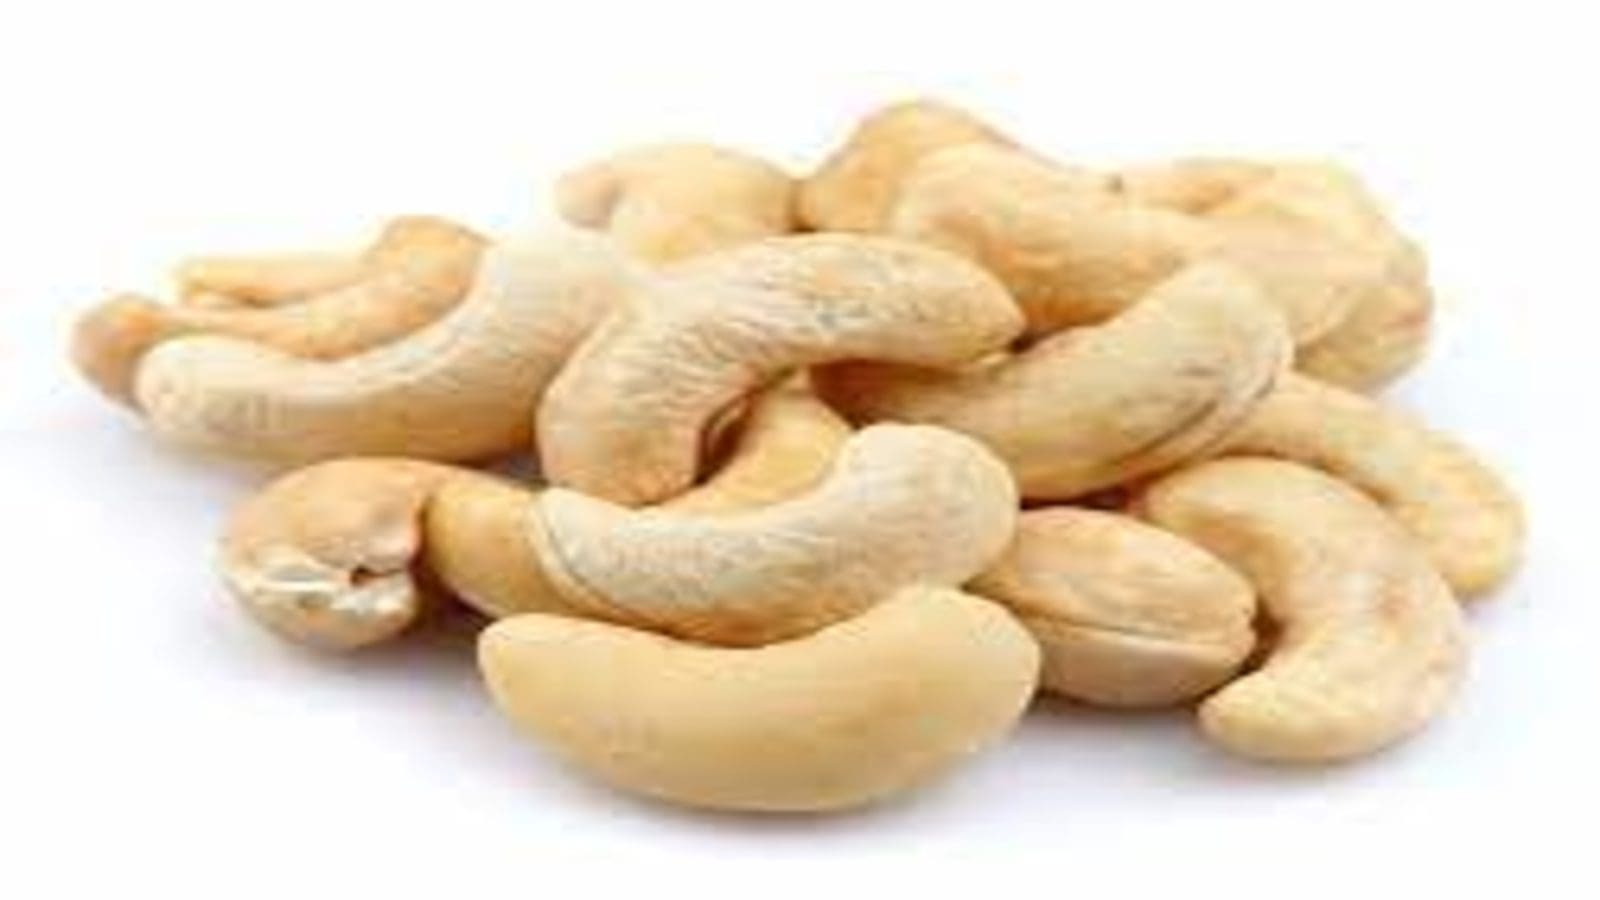 Cashew nut industries seek aid extension from the government to boost local processing